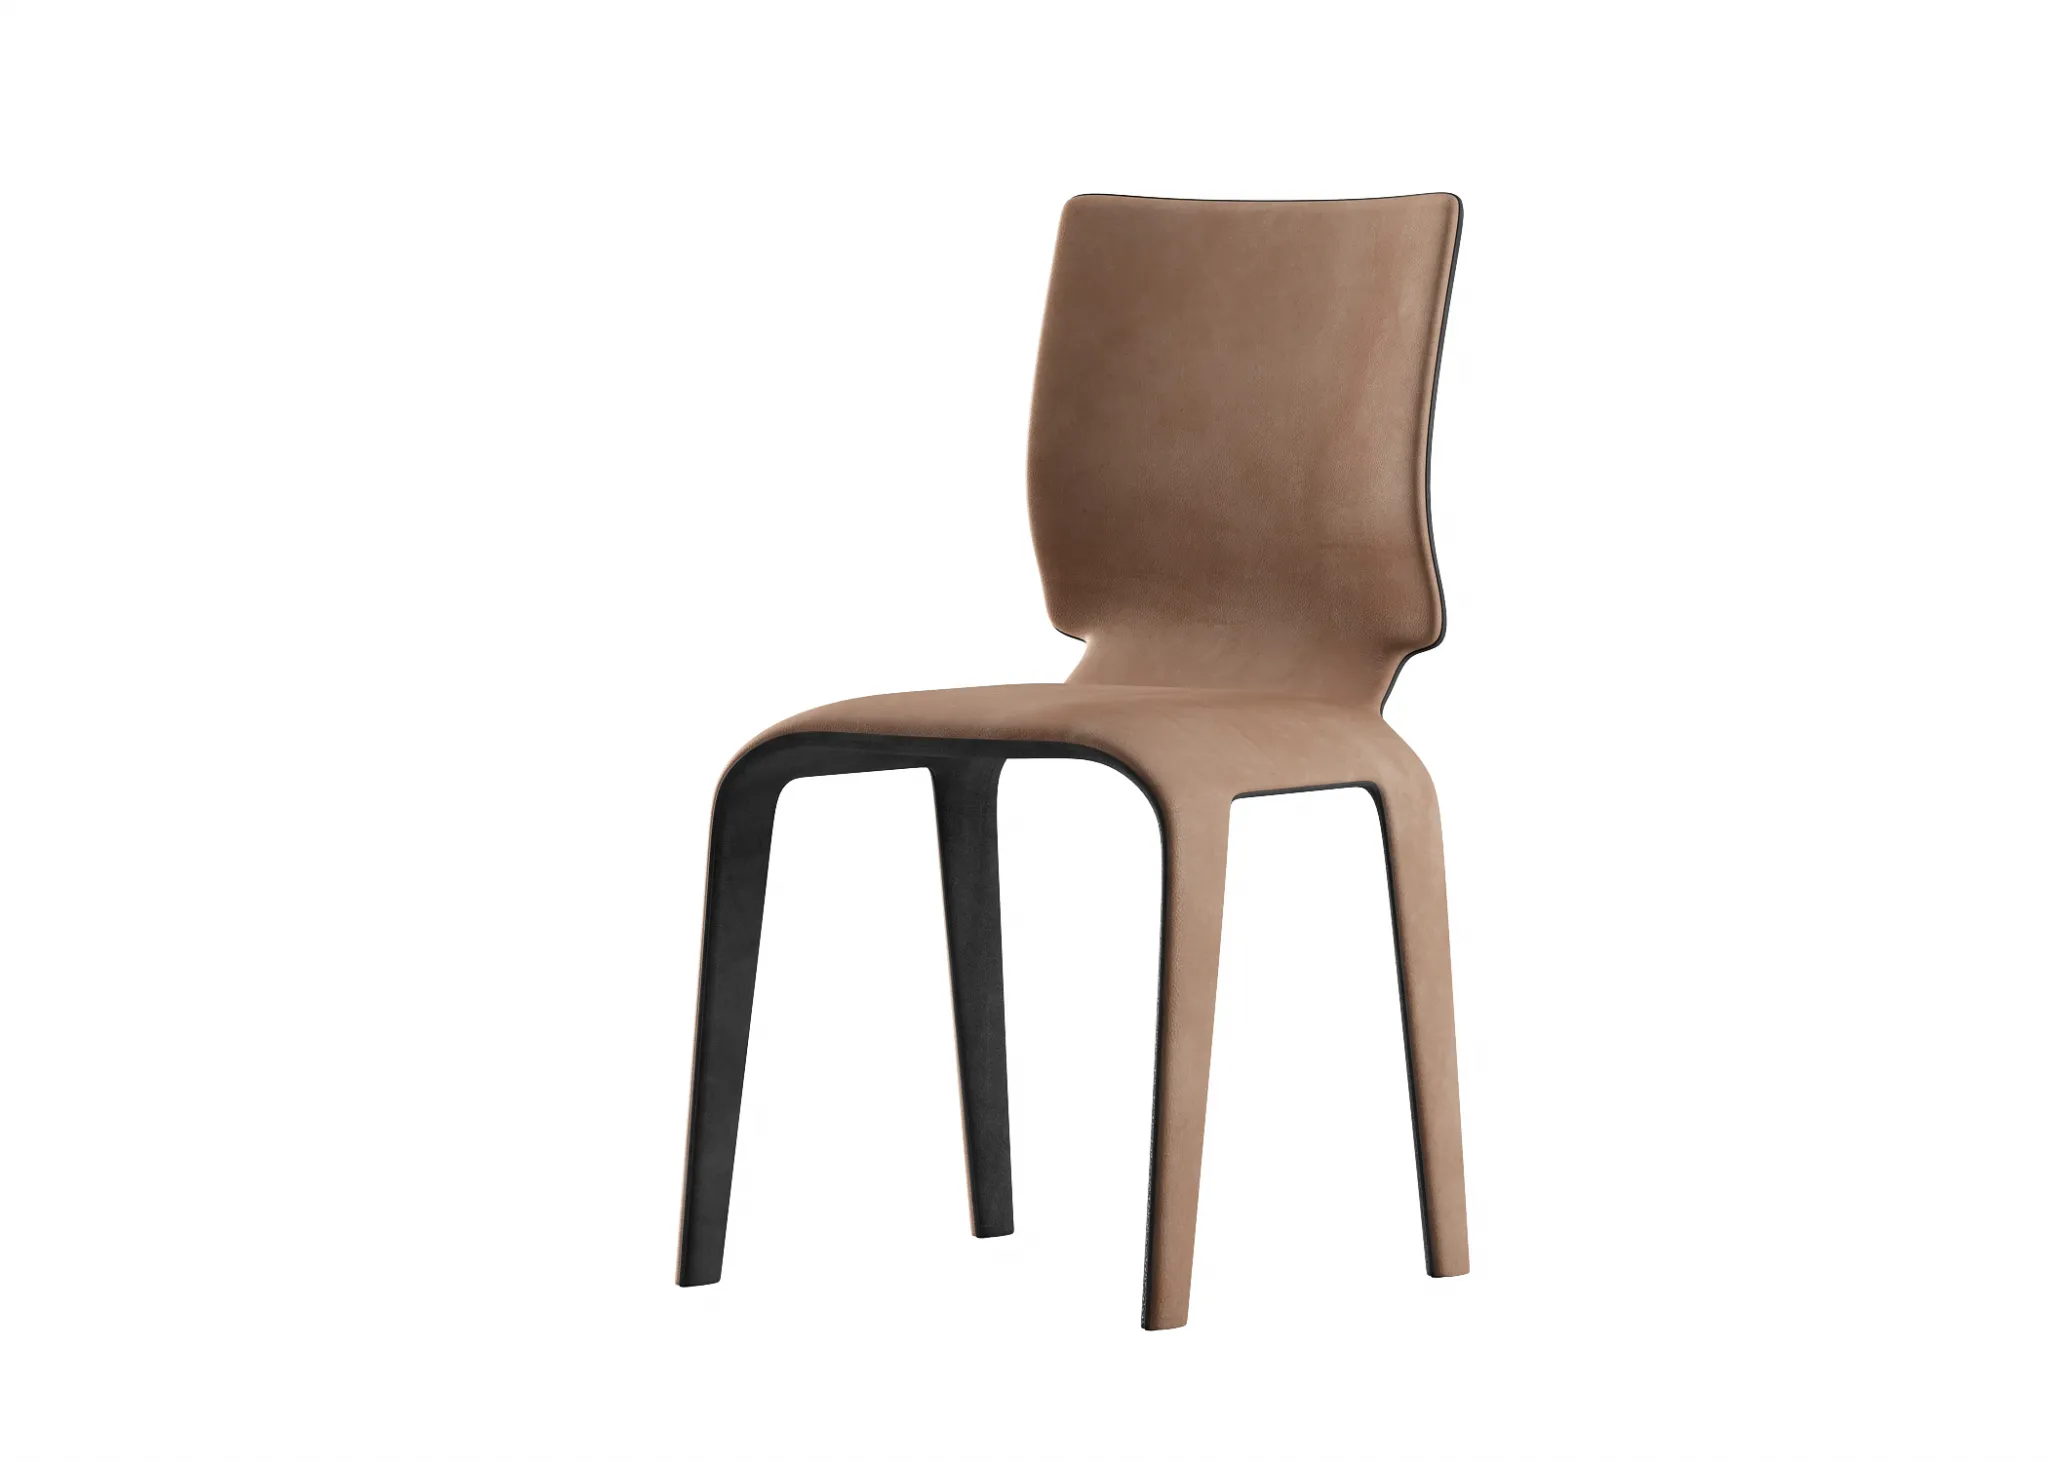 FURNITURE 3D MODELS – CHAIRS – 0461